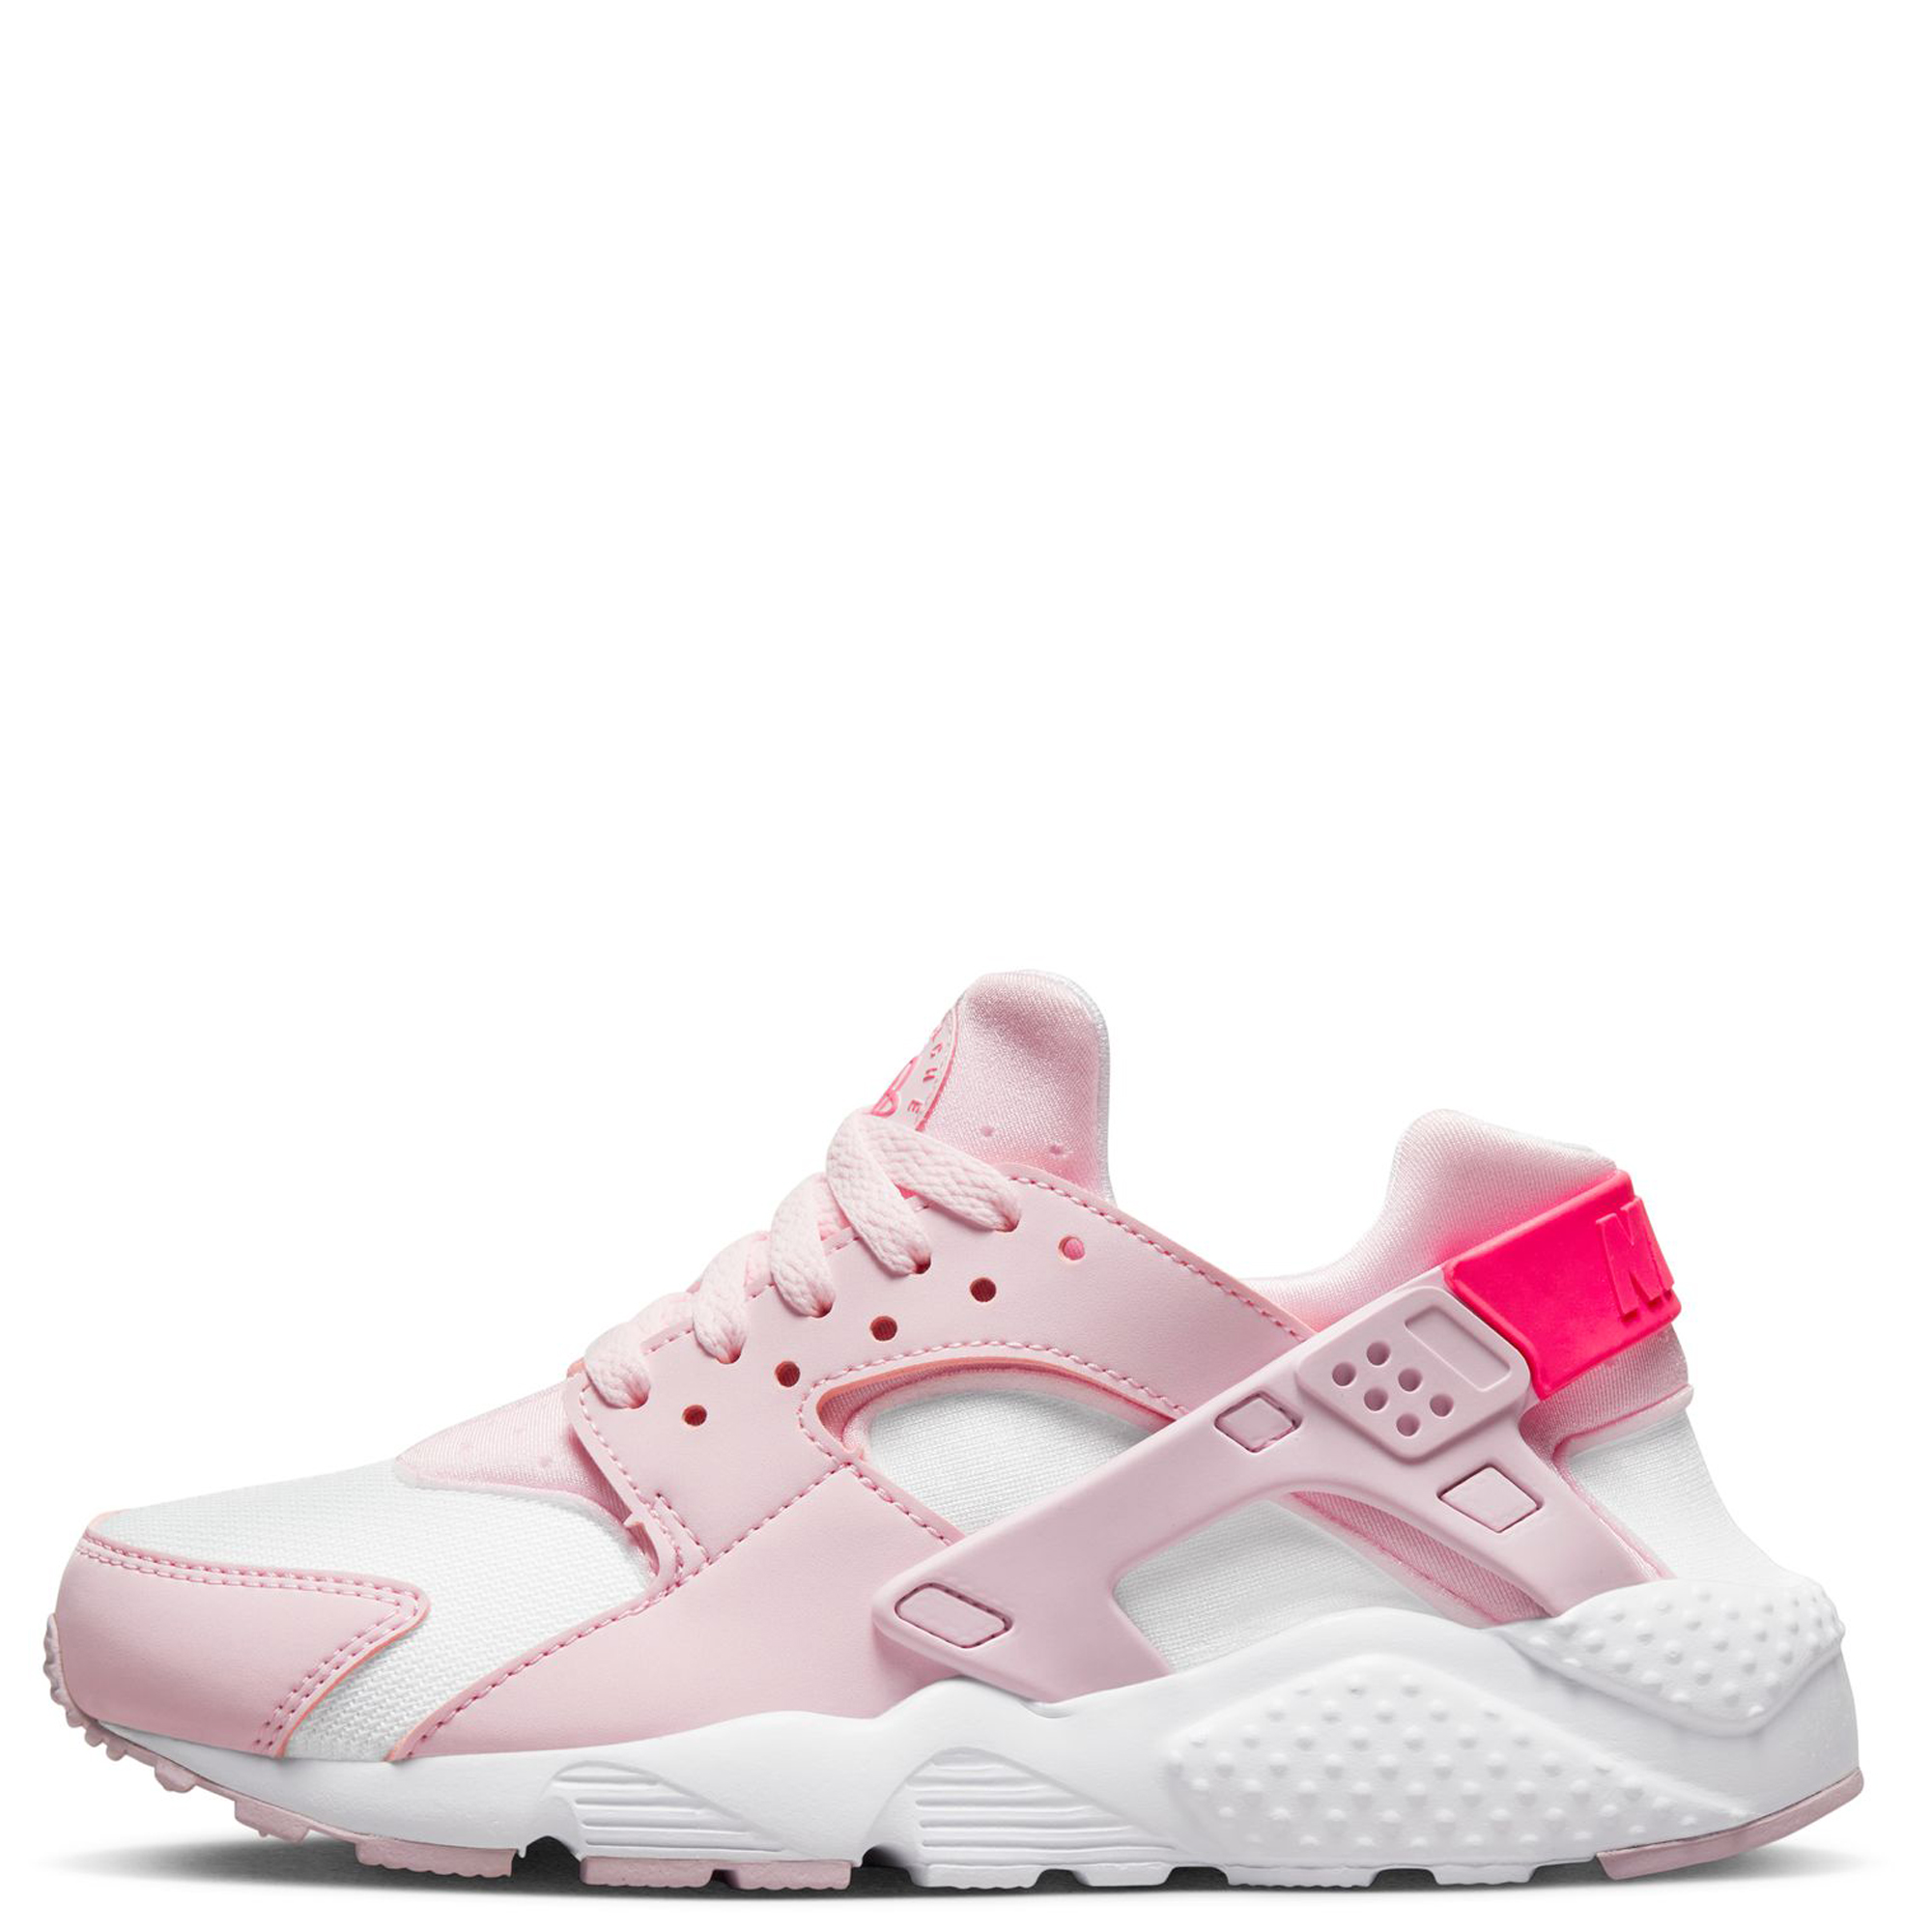 white blue and pink huaraches